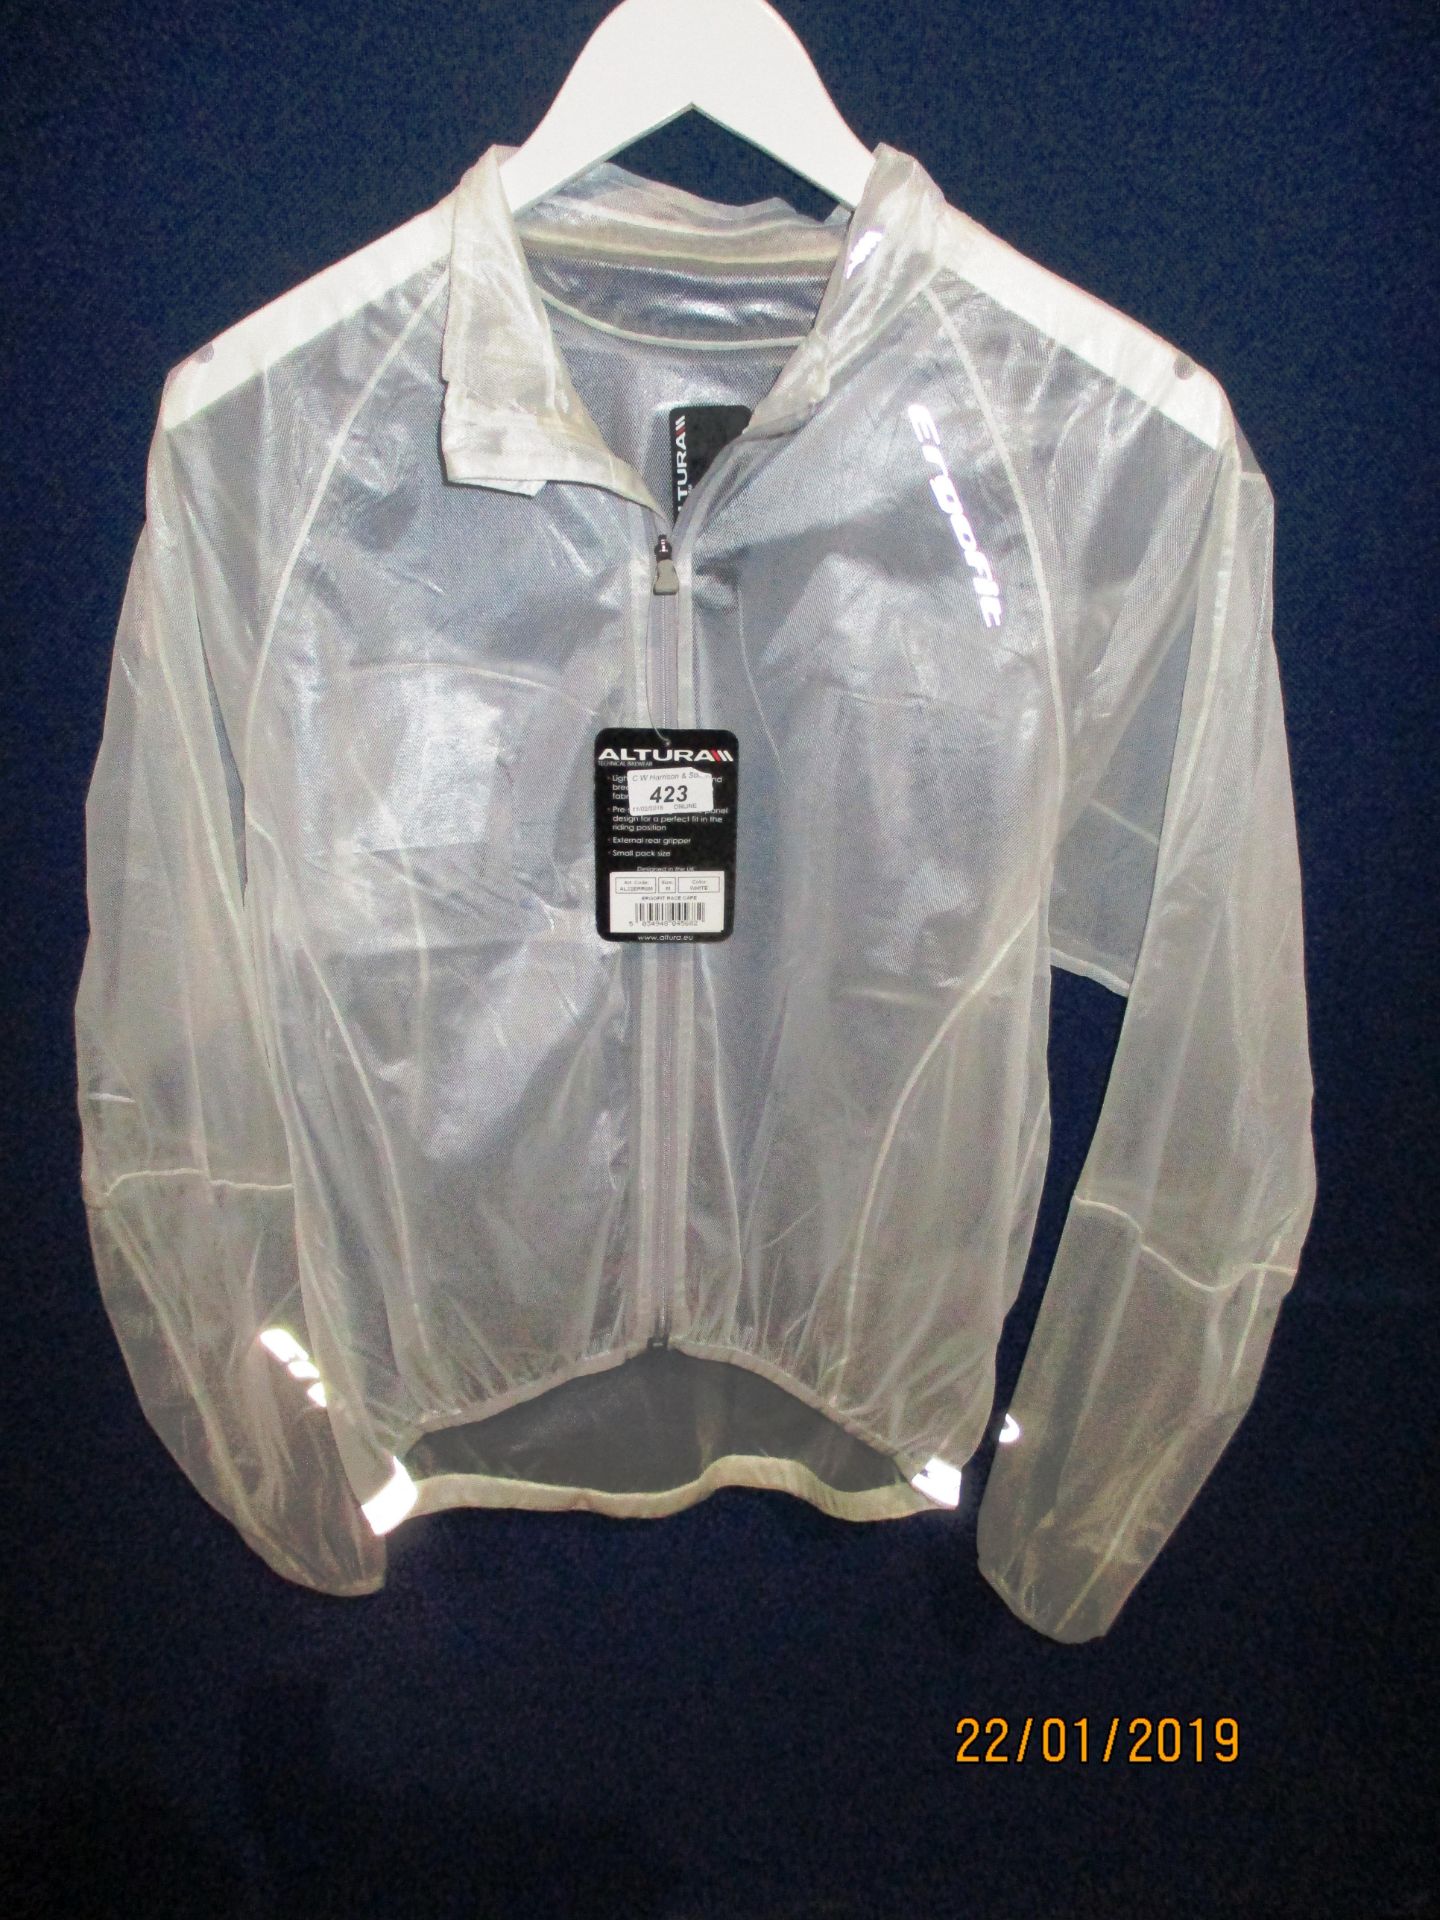 An Altura Race cape jacket size M in clear